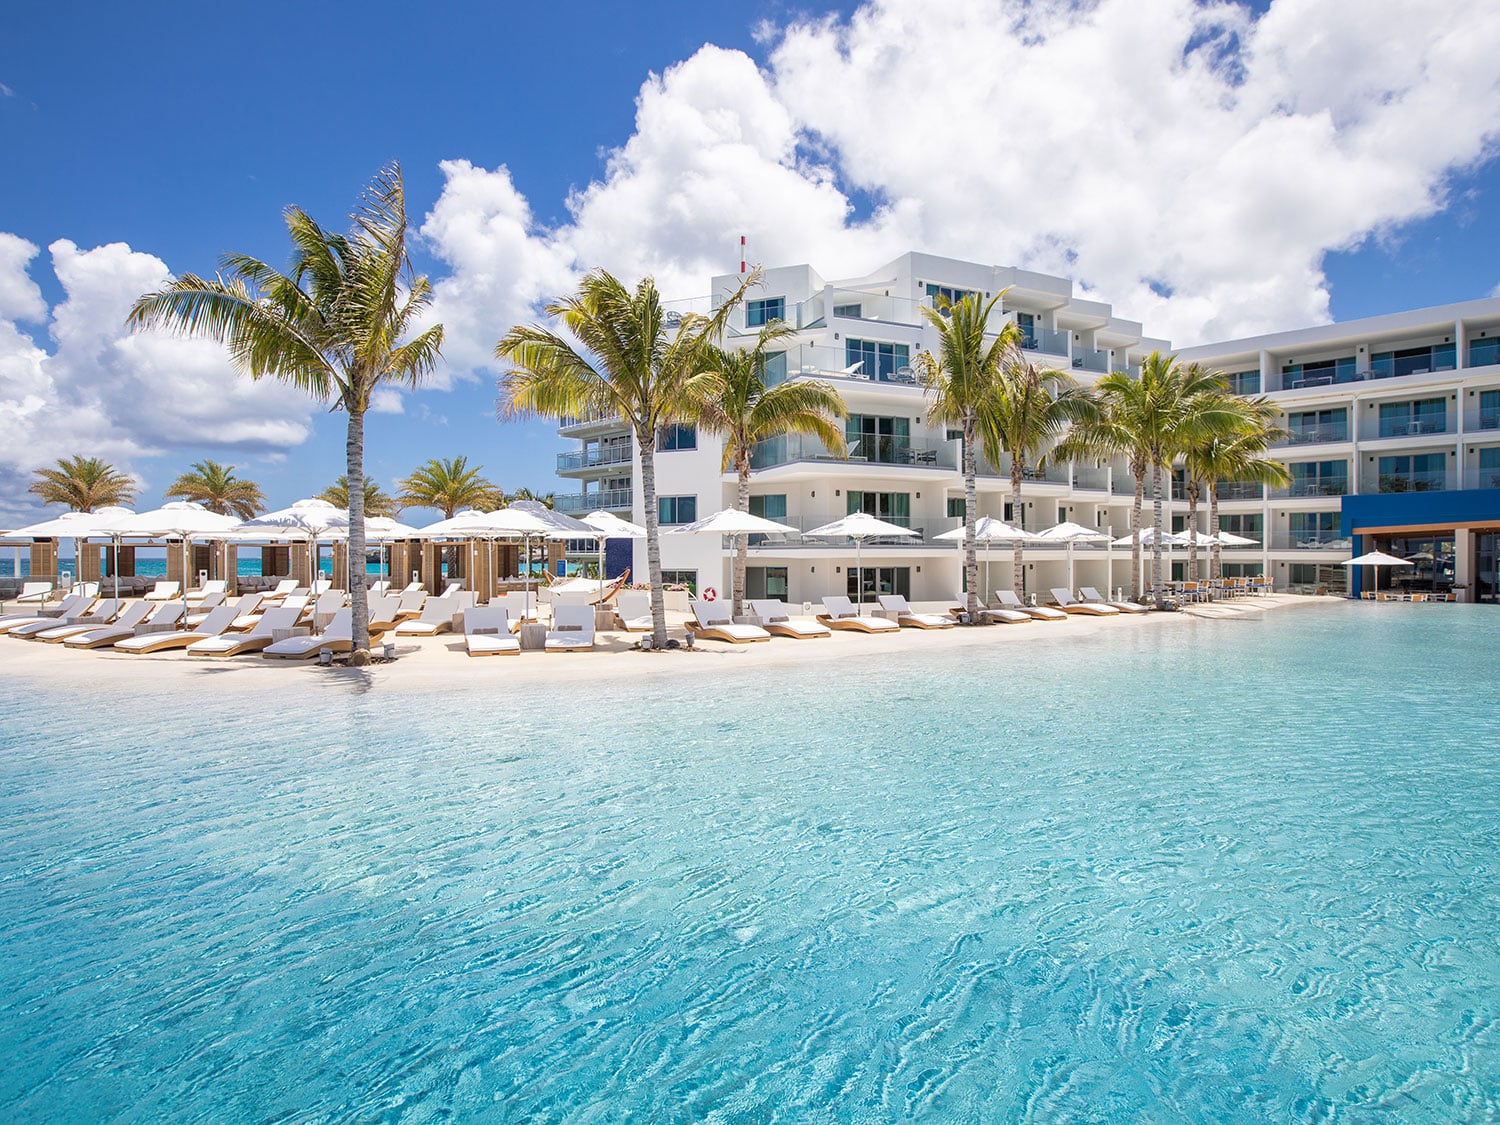 The popular pool at The Morgan Resort and Spa in the Caribbean island of St. Maarten.